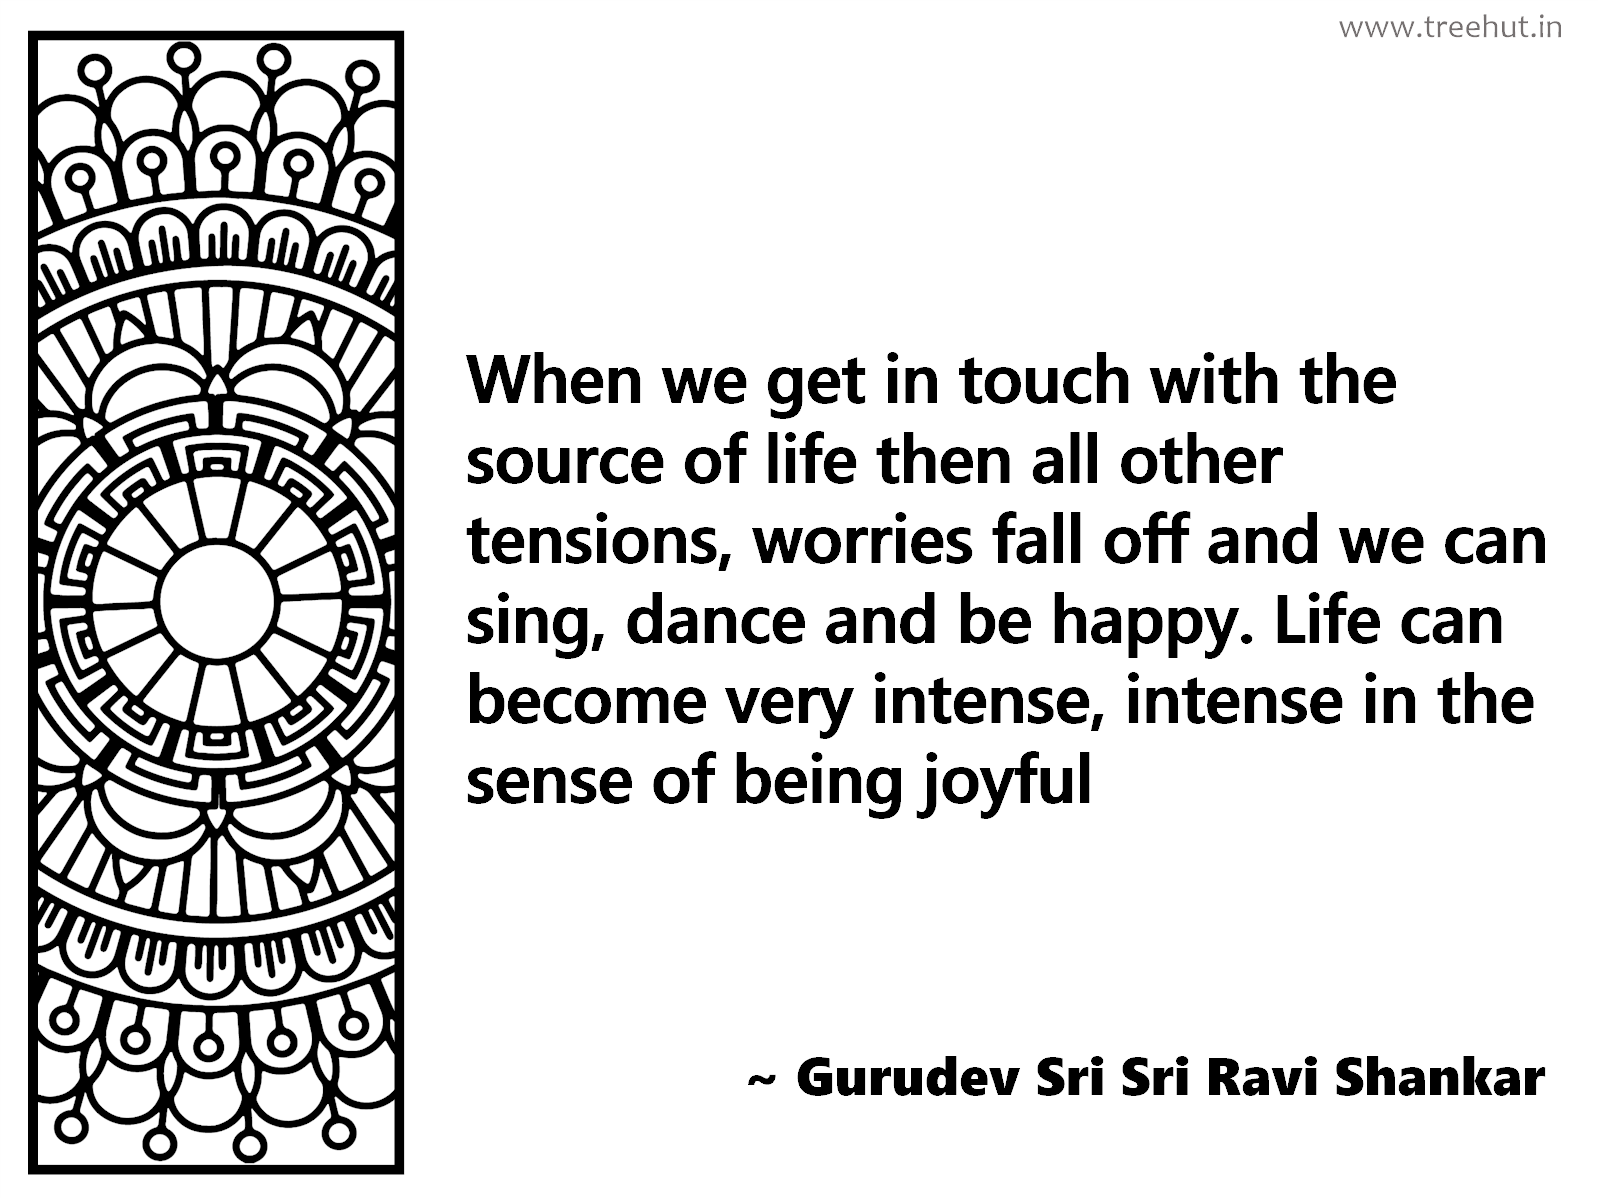 When we get in touch with the source of life then all other tensions, worries fall off and we can sing, dance and be happy. Life can become very intense, intense in the sense of being joyful Inspirational Quote by Gurudev Sri Sri Ravi Shankar, coloring pages